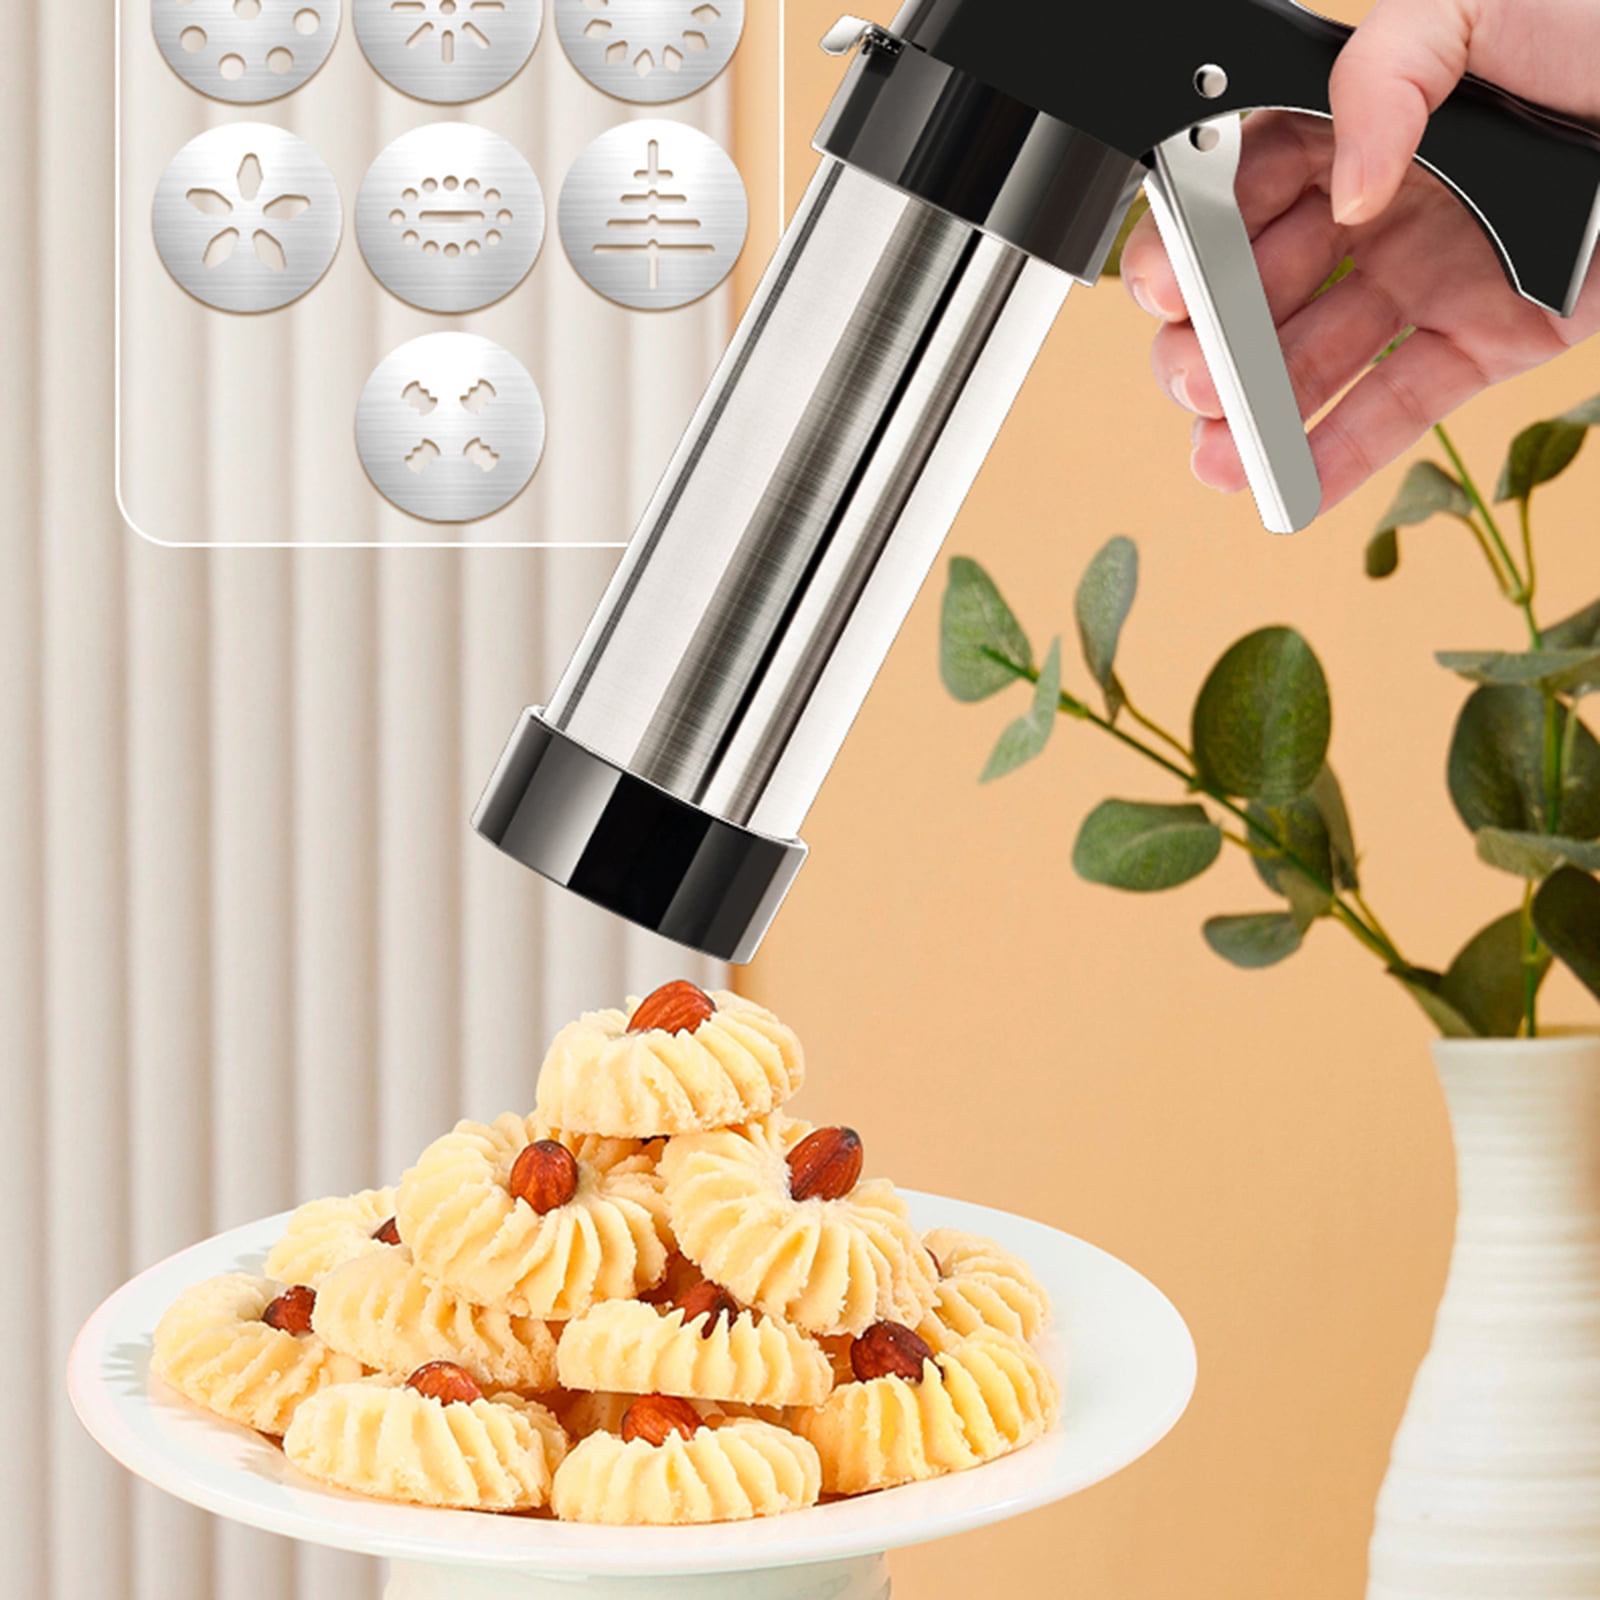 YOOUSOO Cookie Press Maker Kit for DIY Biscuit Maker and Decoration with 8 Stainless Steel Cookie Discs and 8 Nozzles (Stainless Steel)